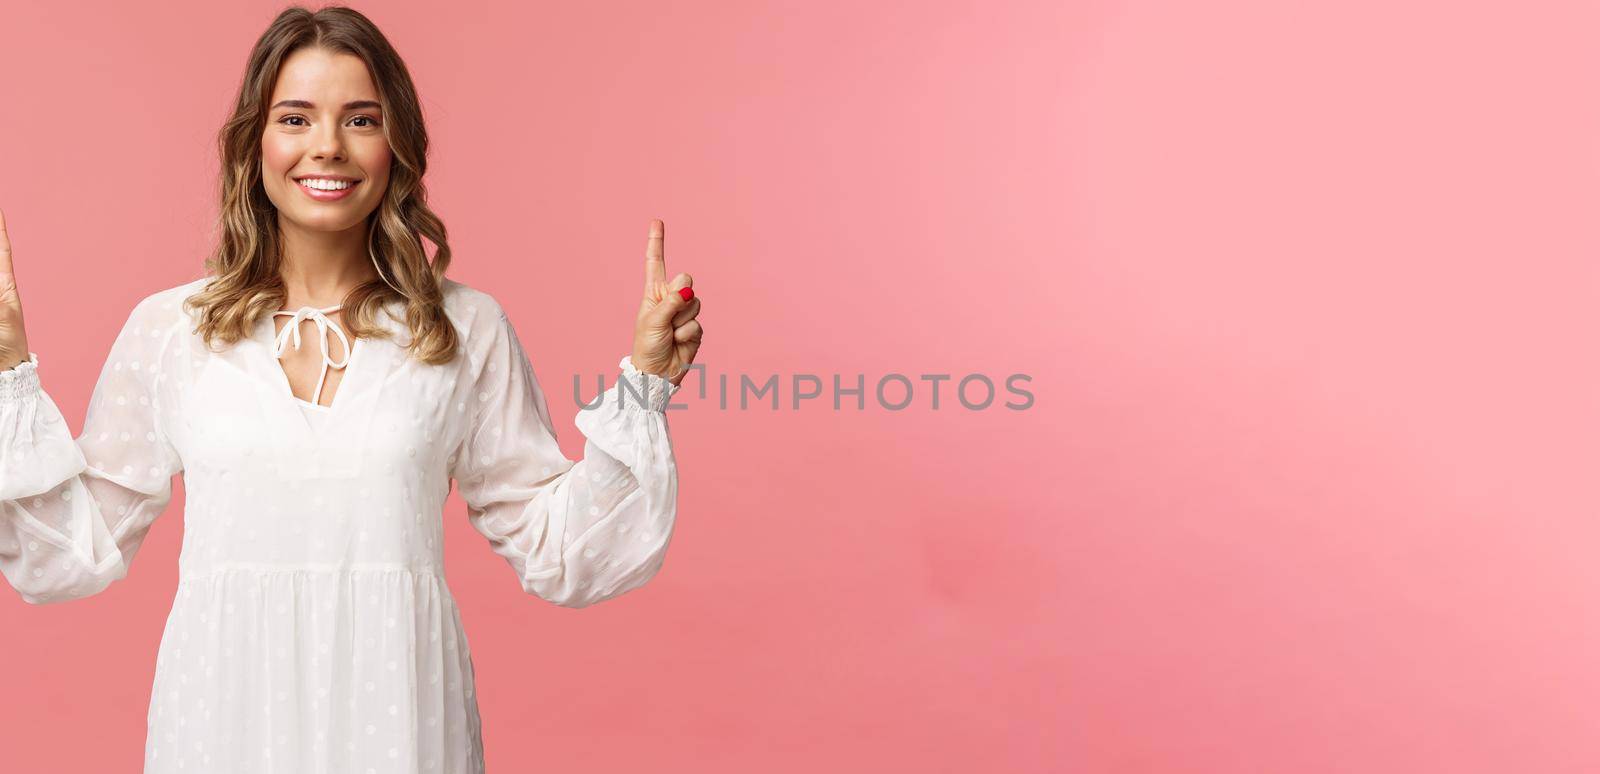 Portrait of confident beautiful young blond woman in white cute dress, pointing fingers up at top advertisement, looking at camera with beaming smile, standing pink background.